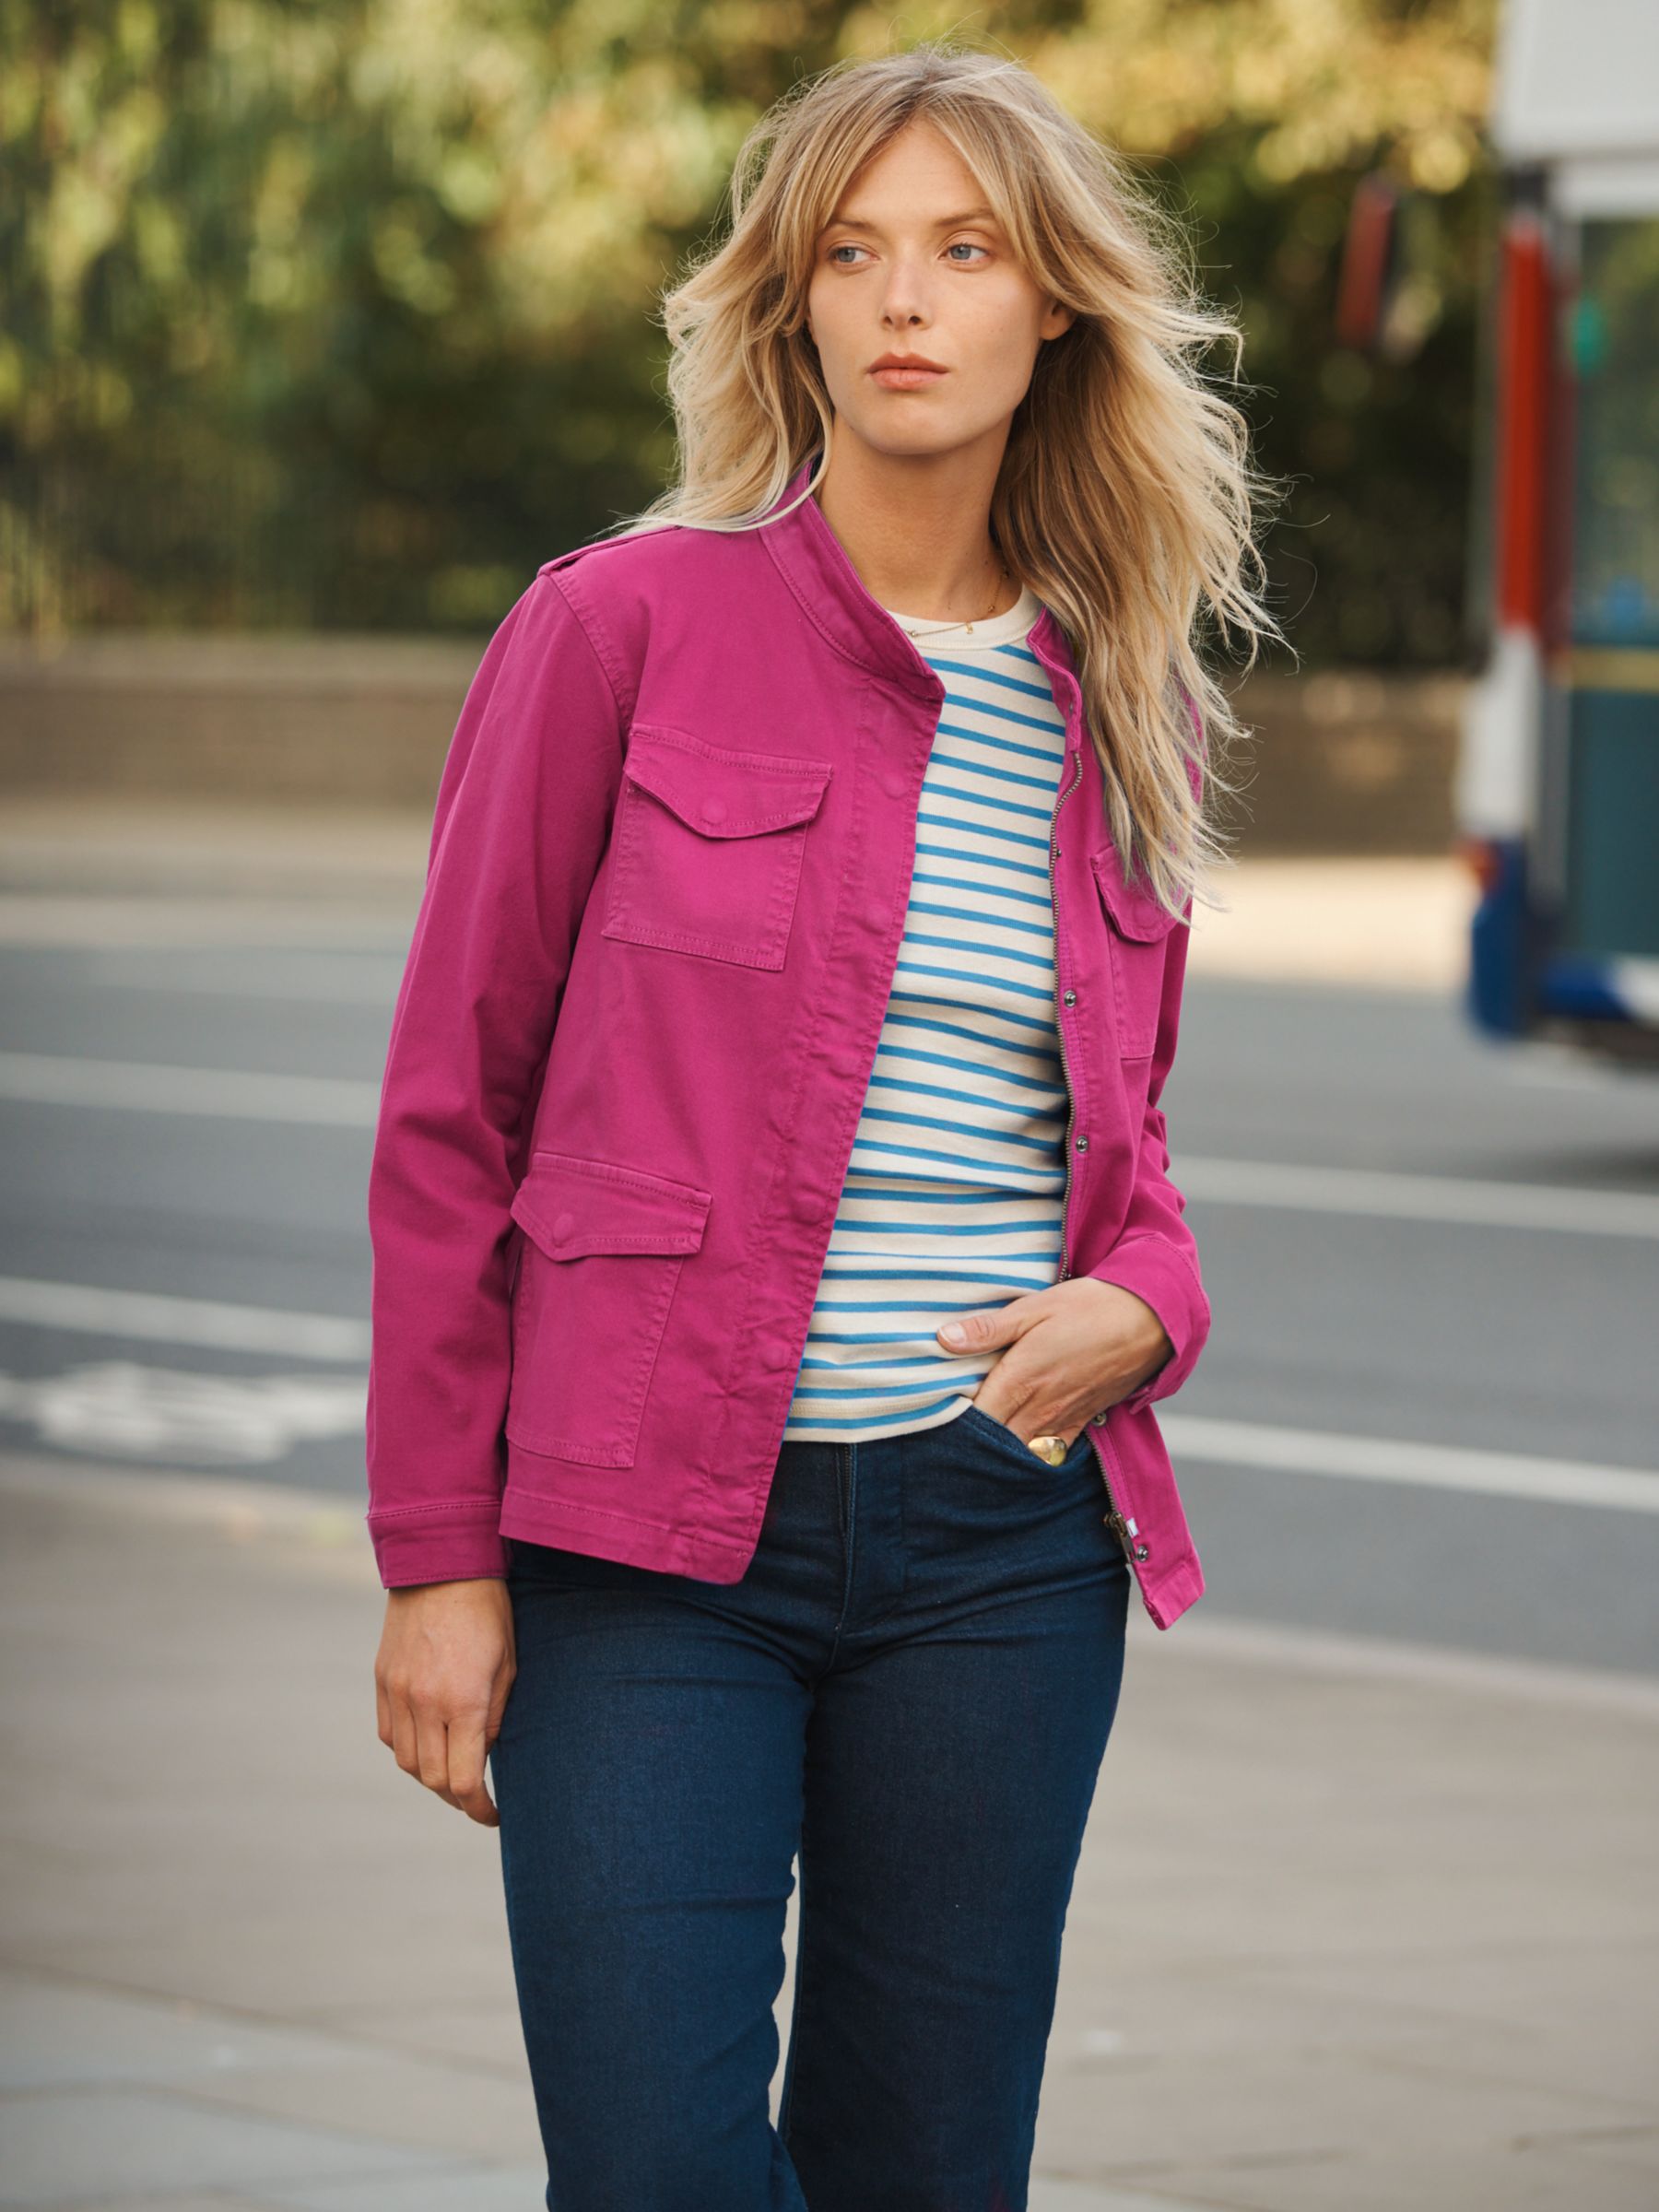 NRBY Monica Cotton Utility Jacket, Hot Pink at John Lewis & Partners